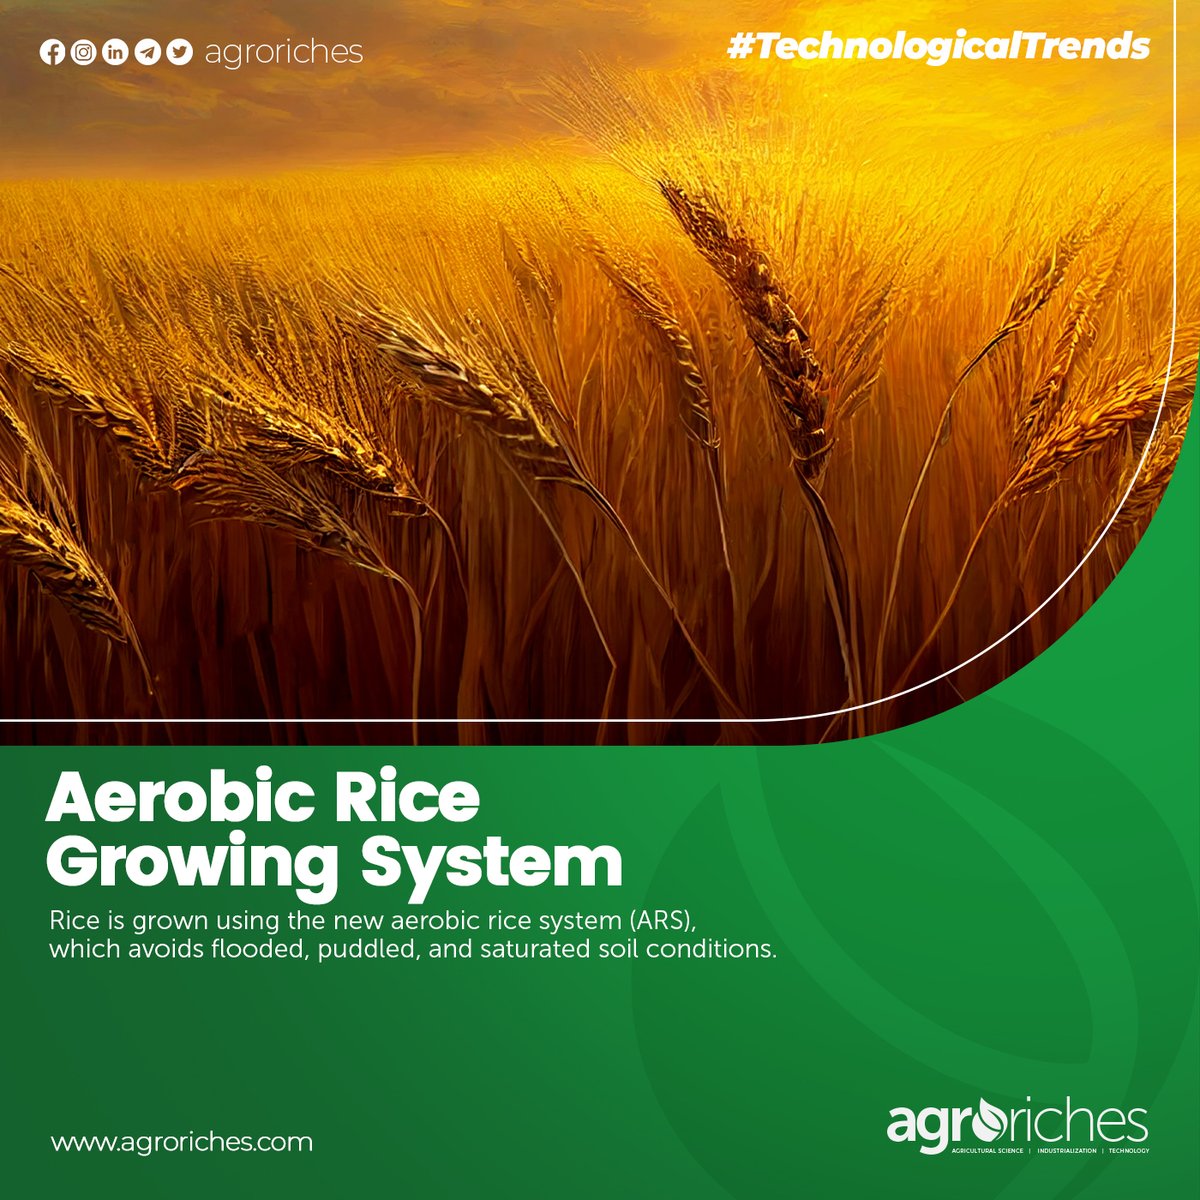 Aerobic Rice Growing System.
Visit our website agroriches.com, to know the uses and benefits.

#agroriches #agriculturaltrends #agriculturenews #exploreghana #trendinginghana #machine #ghana #technews #farming #growth #agriculture #cocoa #crops #plants